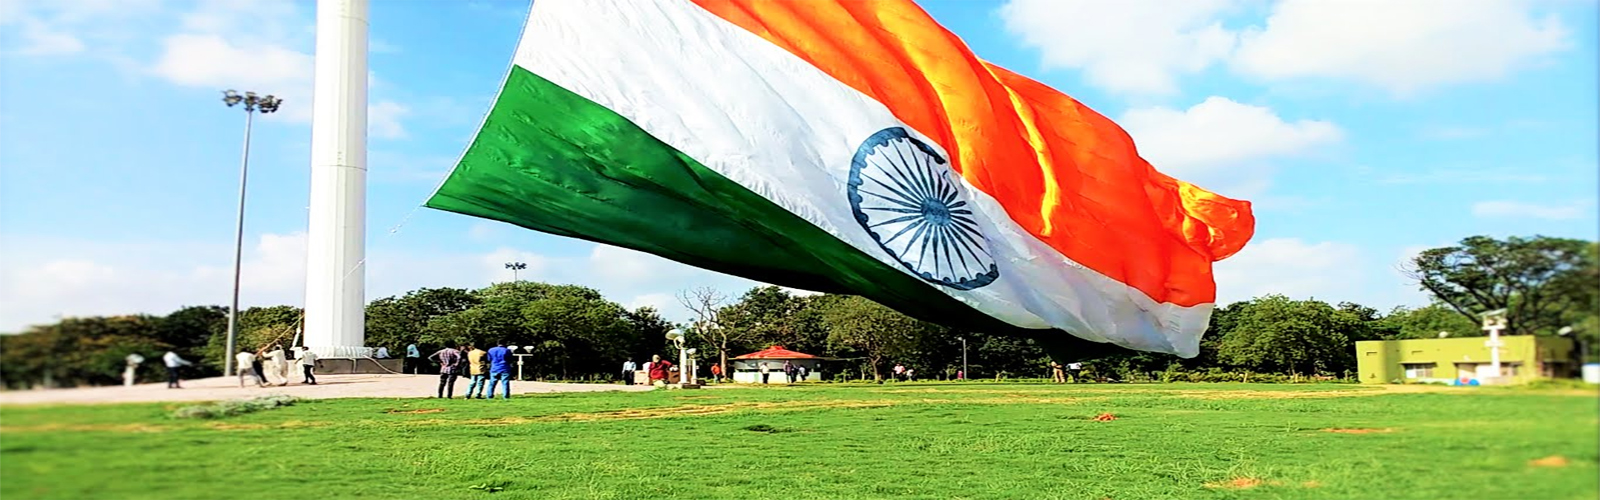 Here's why India's 'tallest' flag cannot be hoisted at Pakistan border